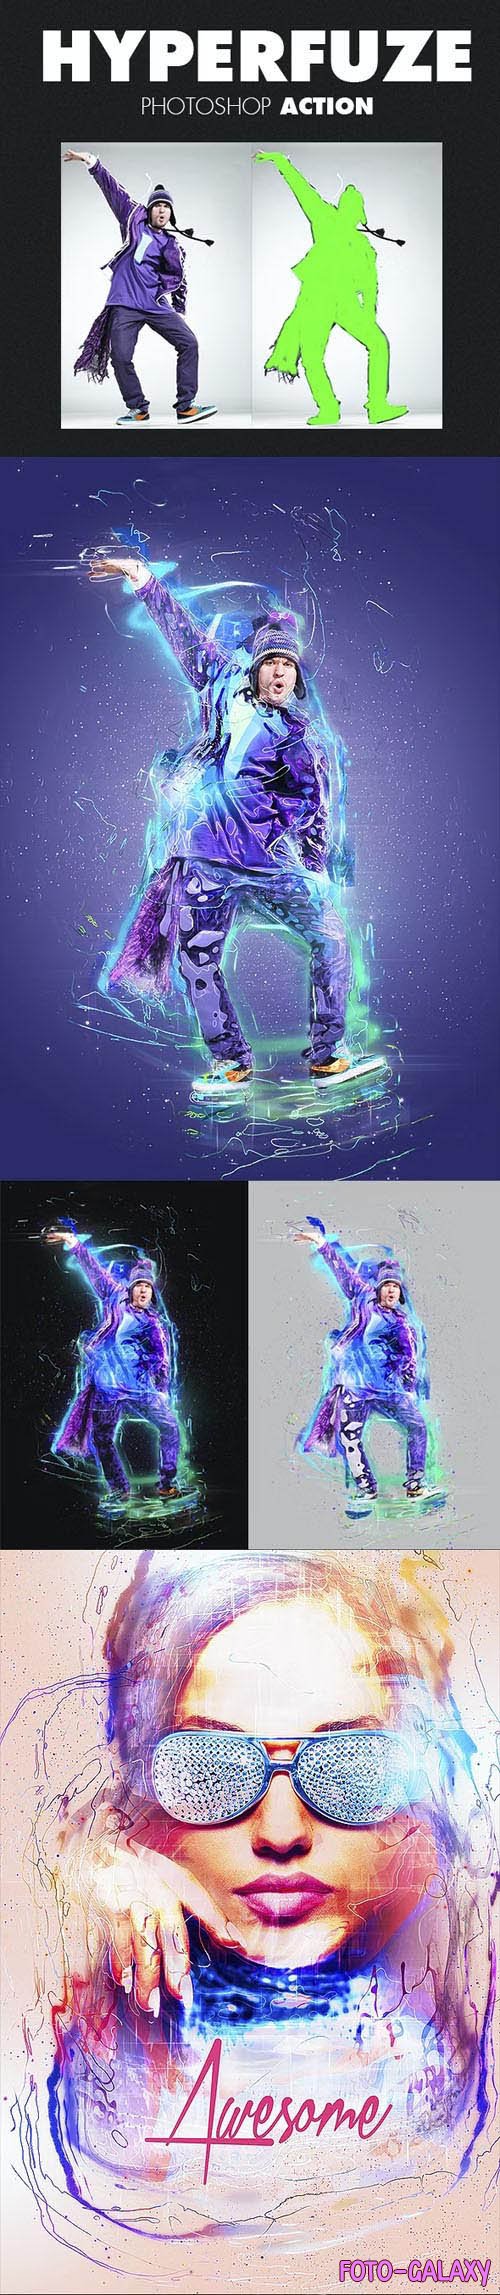 HyperFuze Action for Photoshop